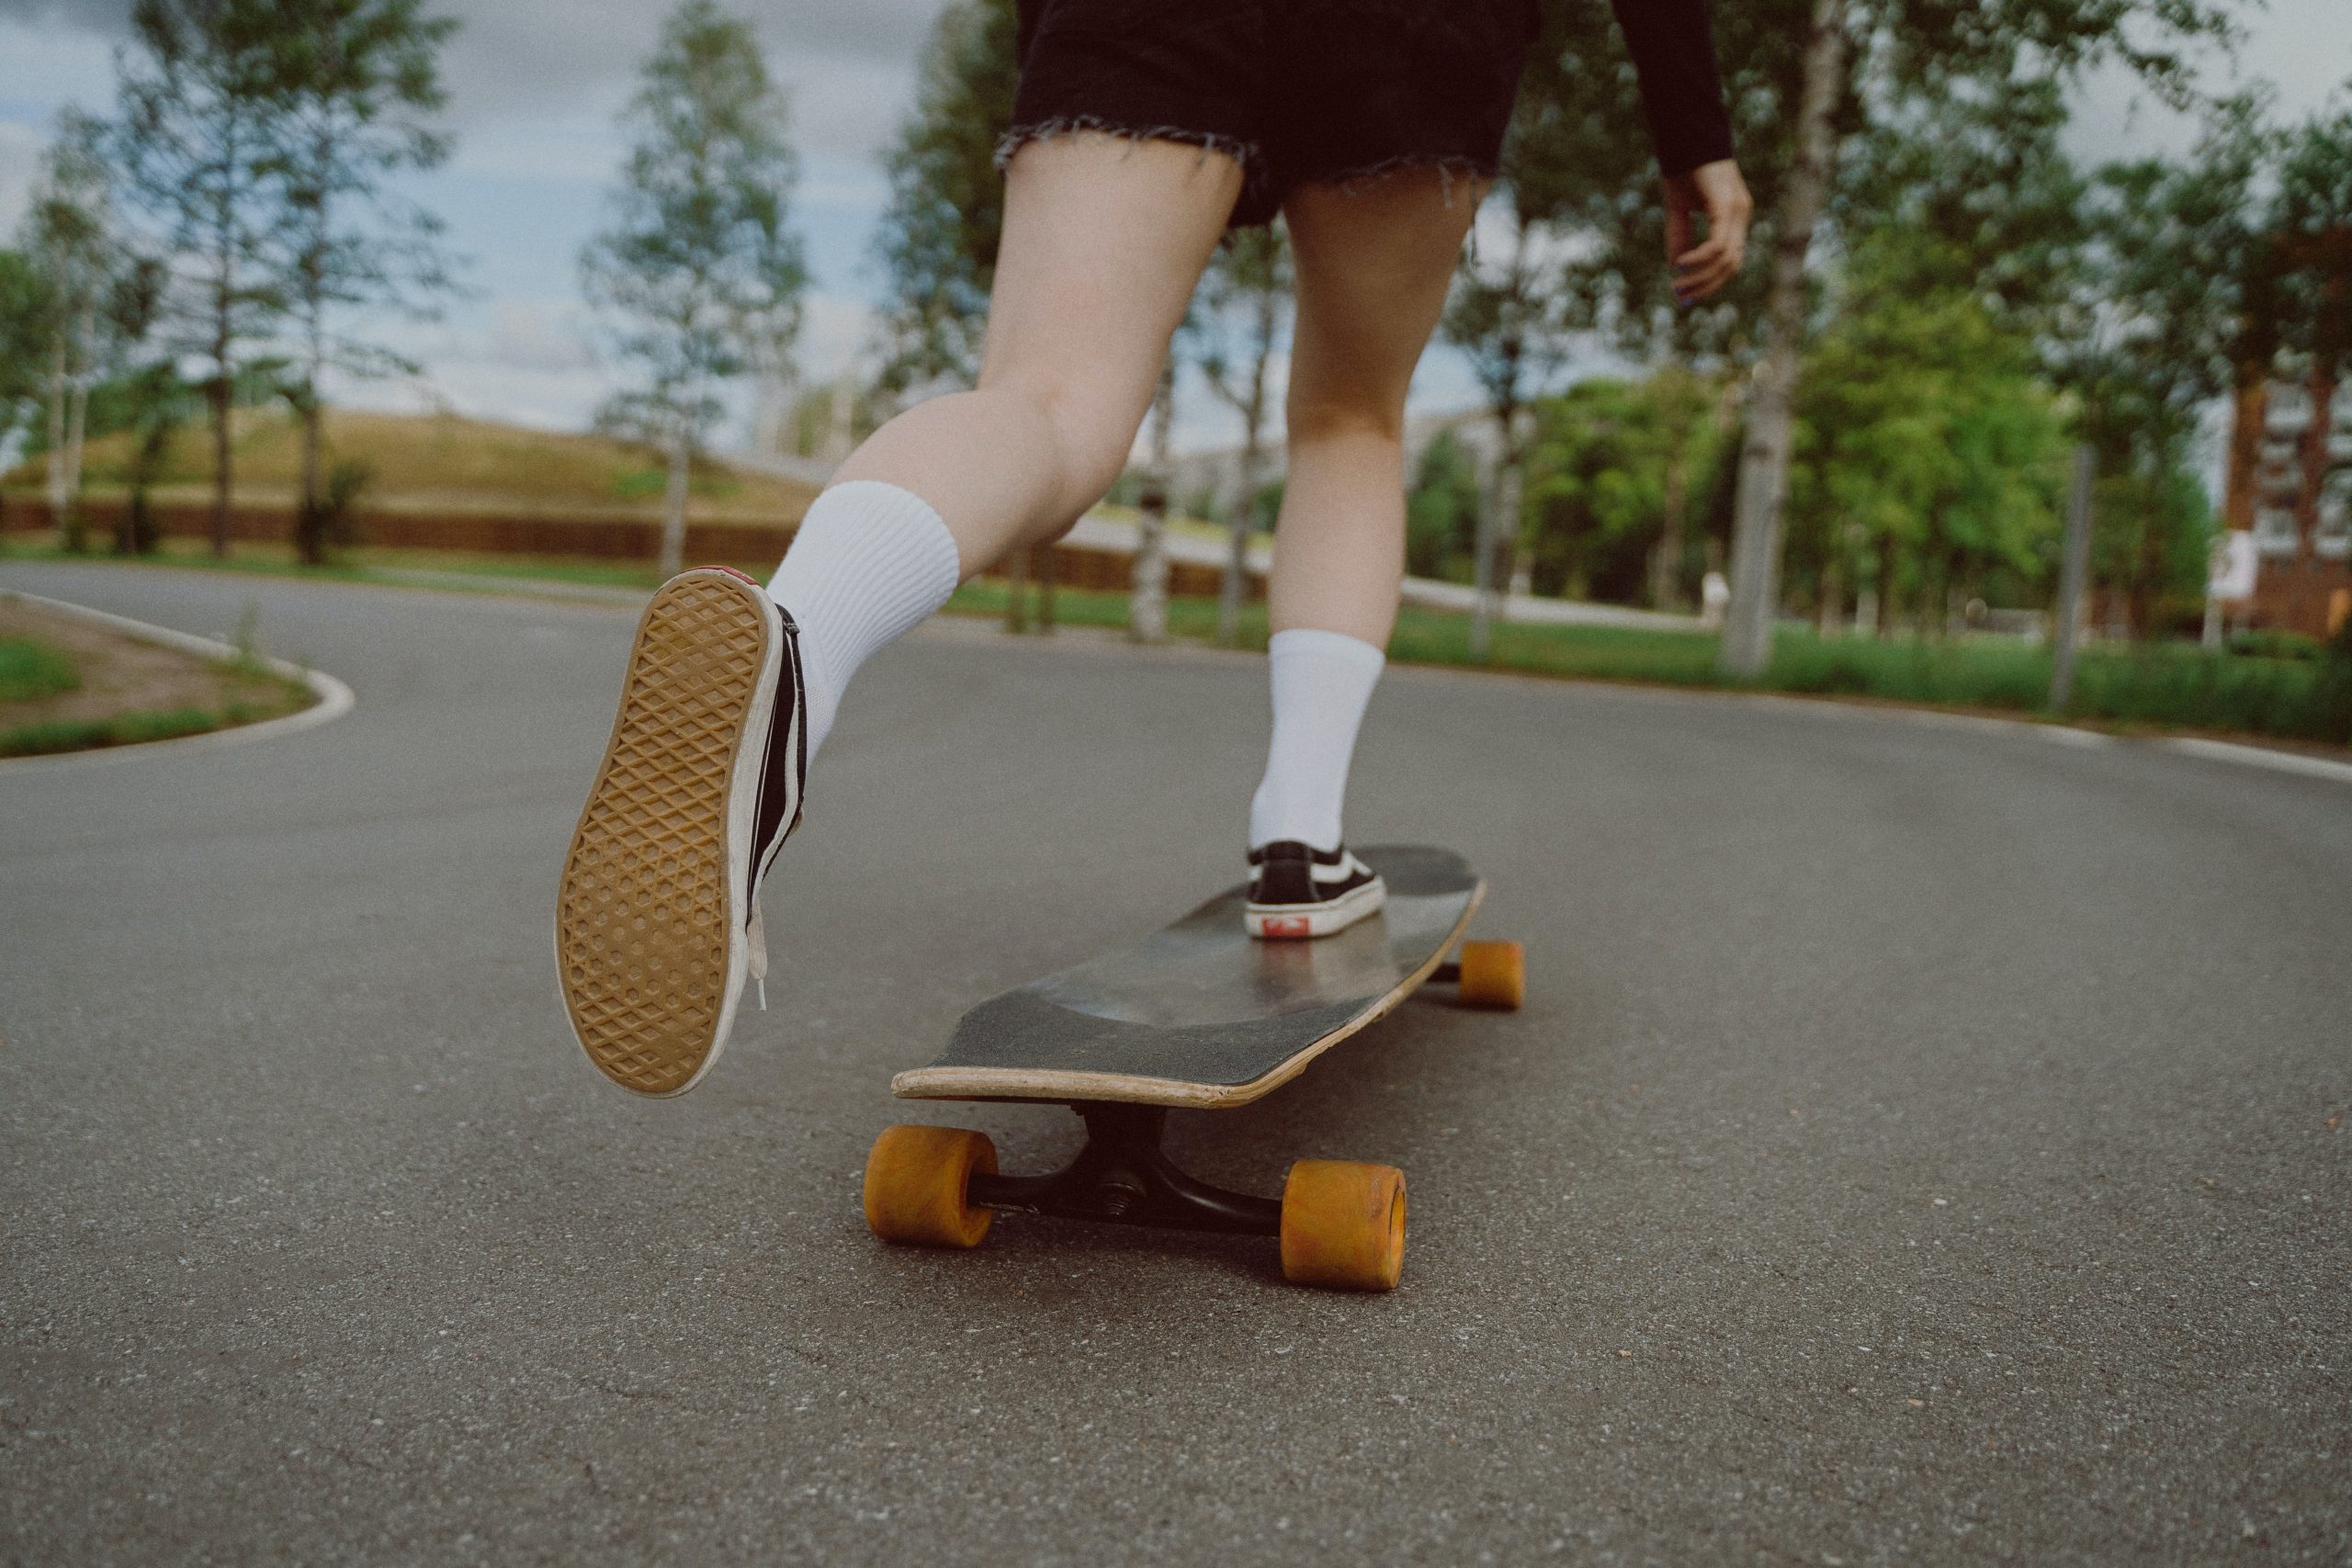 How to make longboard faster